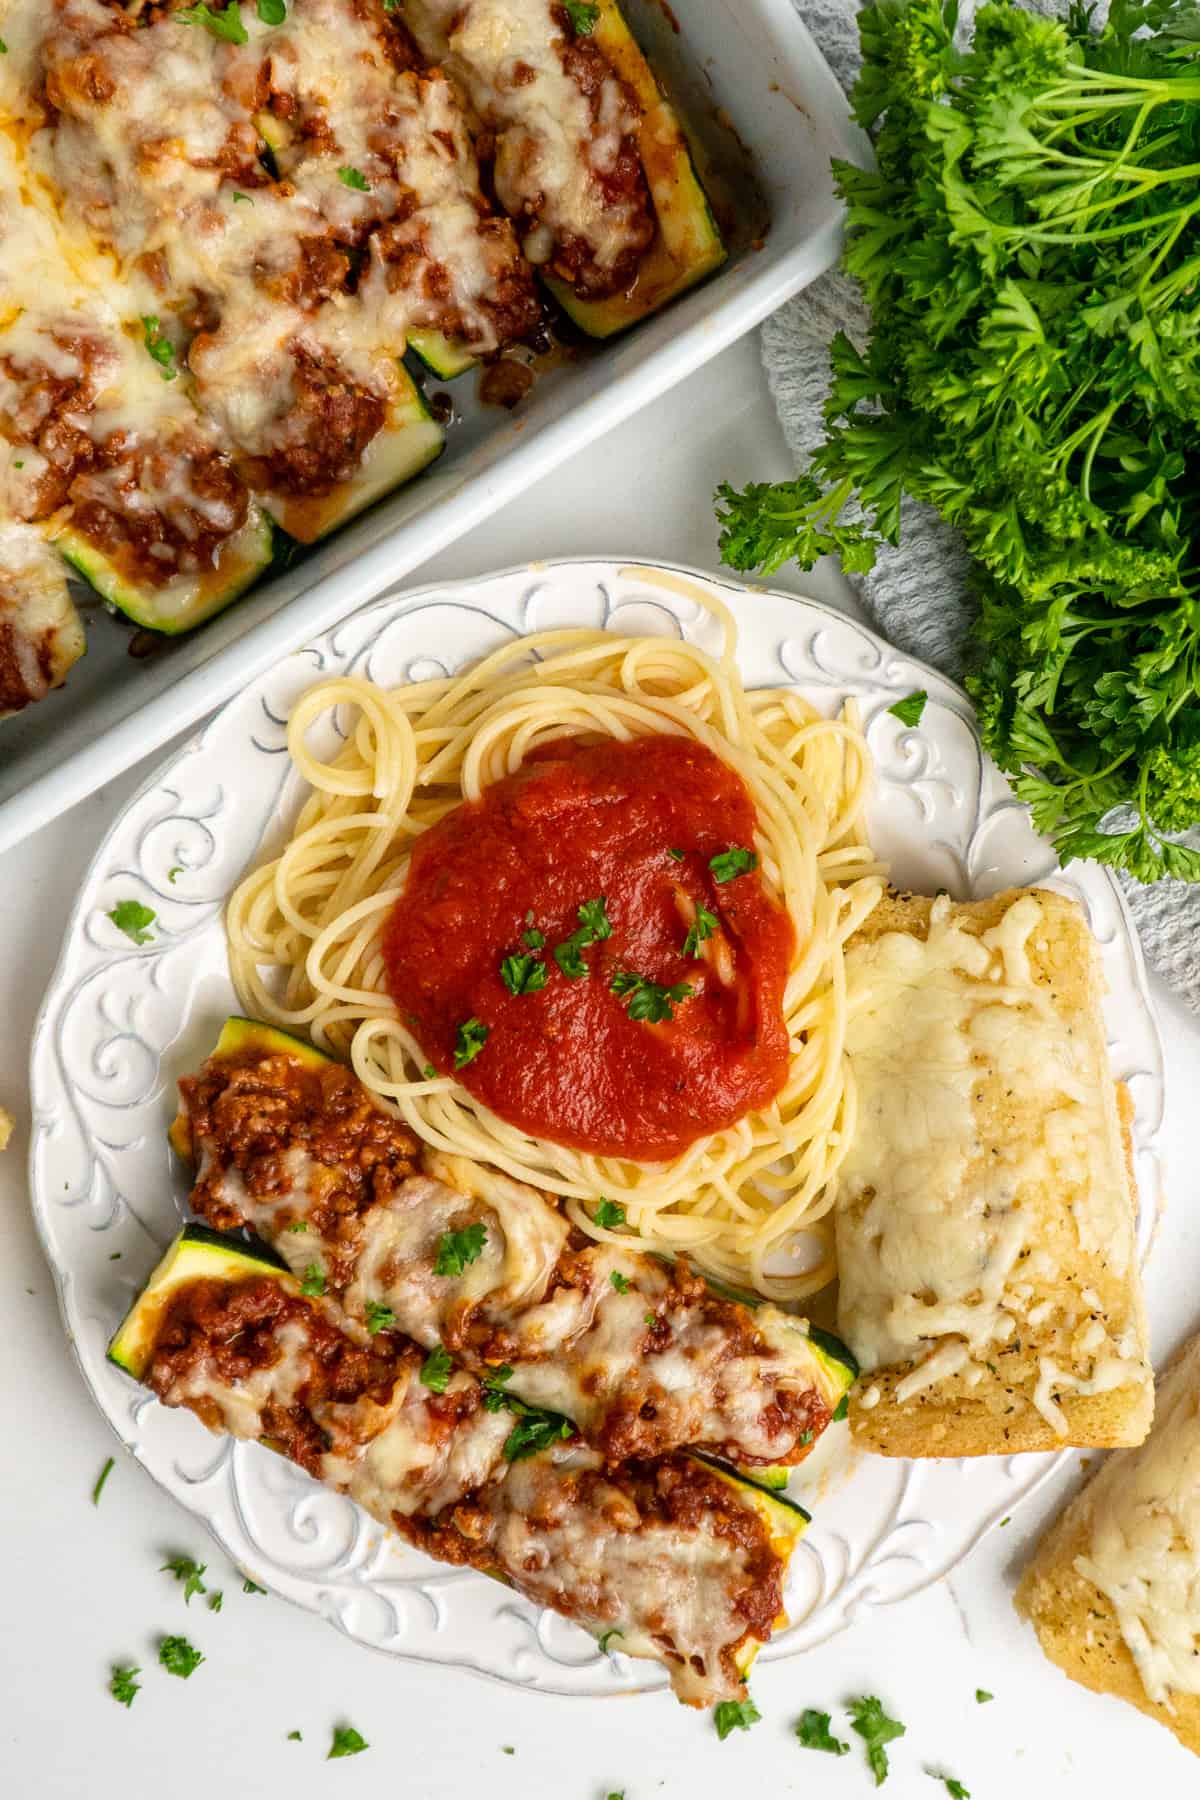 Two stuffed zucchini boats on a plate with pasta and bread.